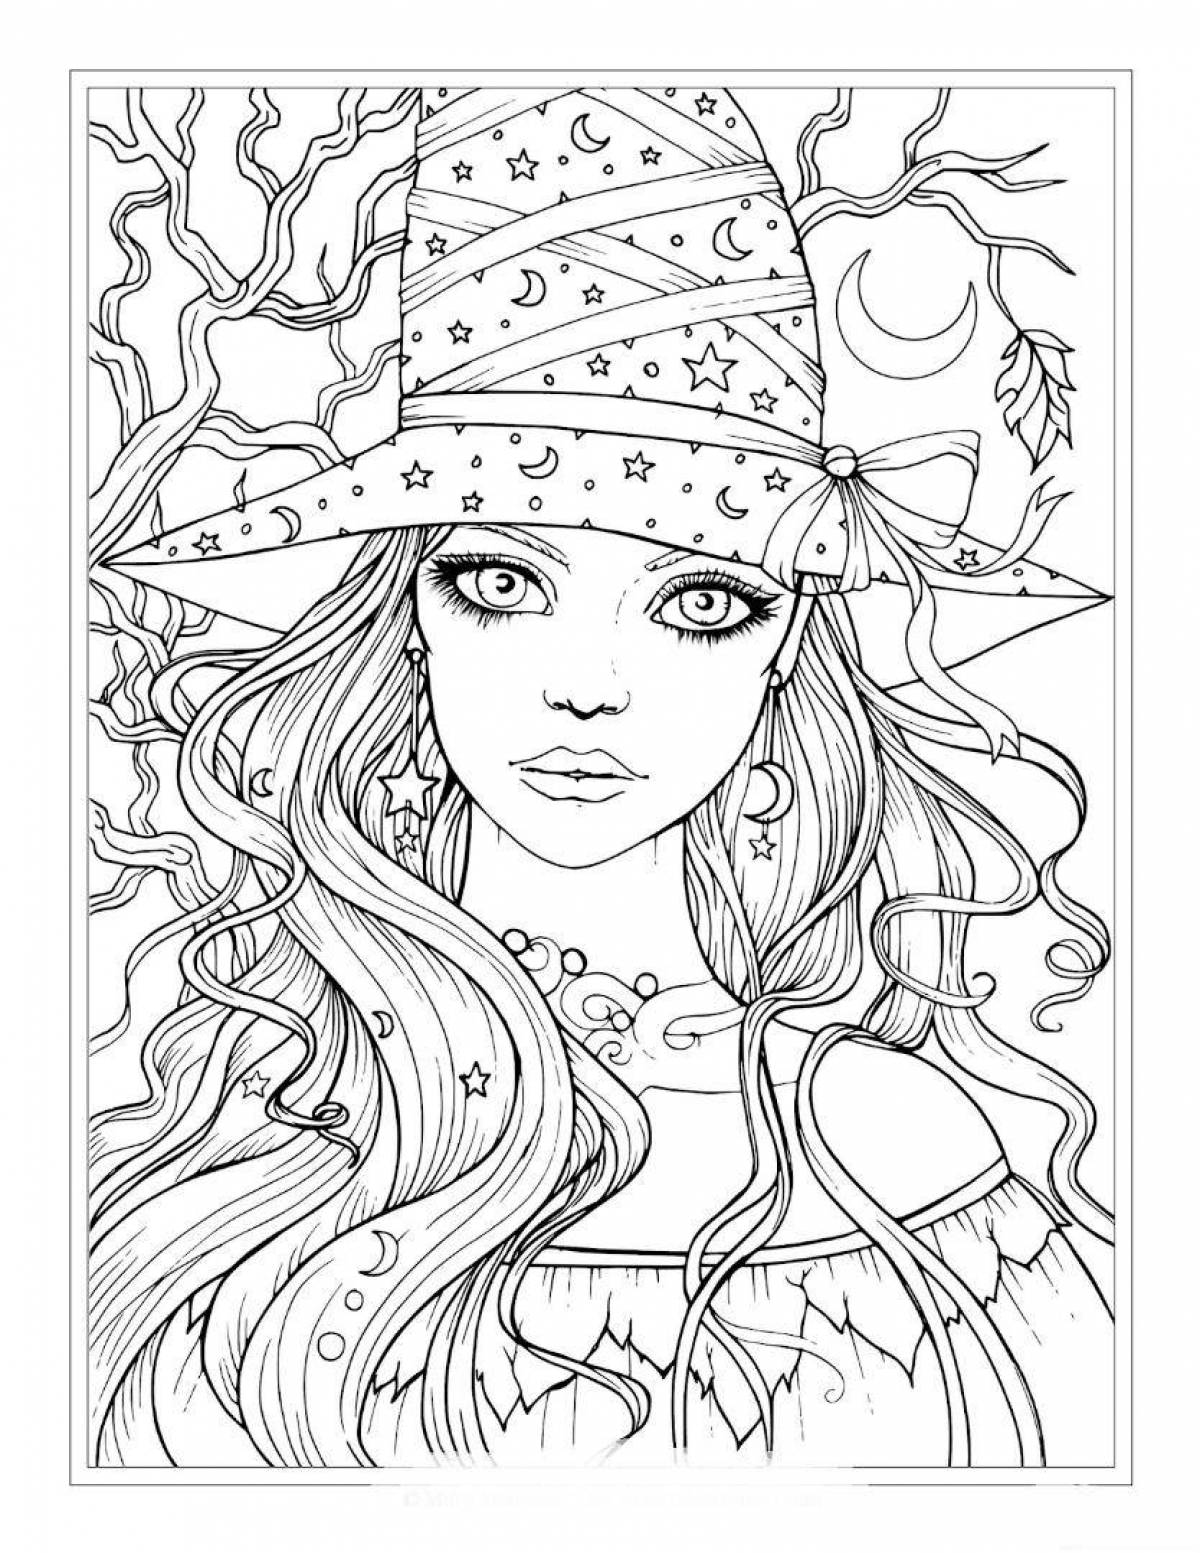 Fashionable coloring for girls 15 years old, modern